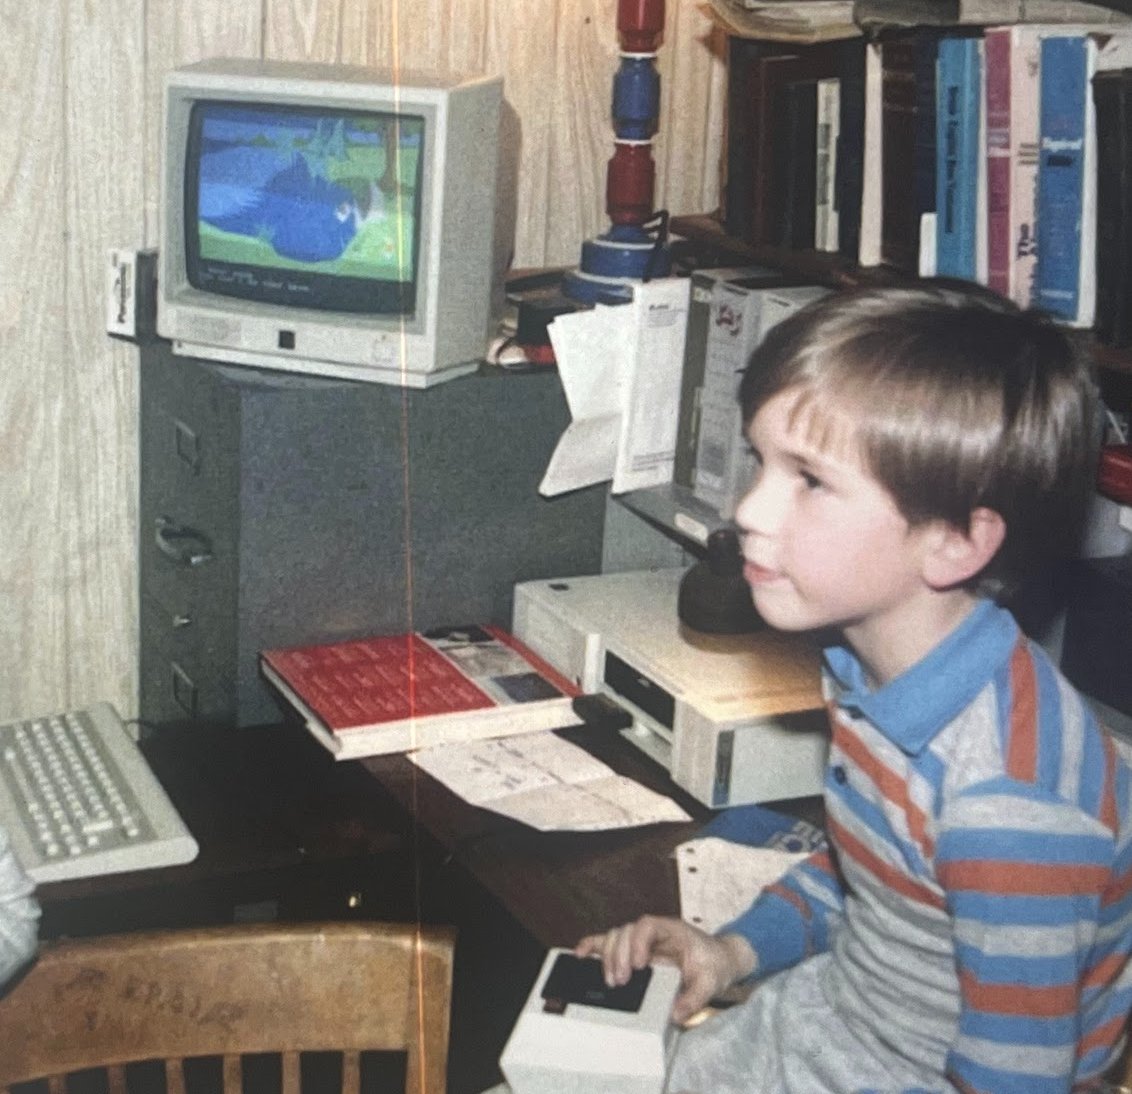 Quote tweet an old photo of you.

I'll throw it back further.  1984, playing Sierra's 'King's Quest' on an old PCjr (8088, 4.77 MHz, 64kb RAM).